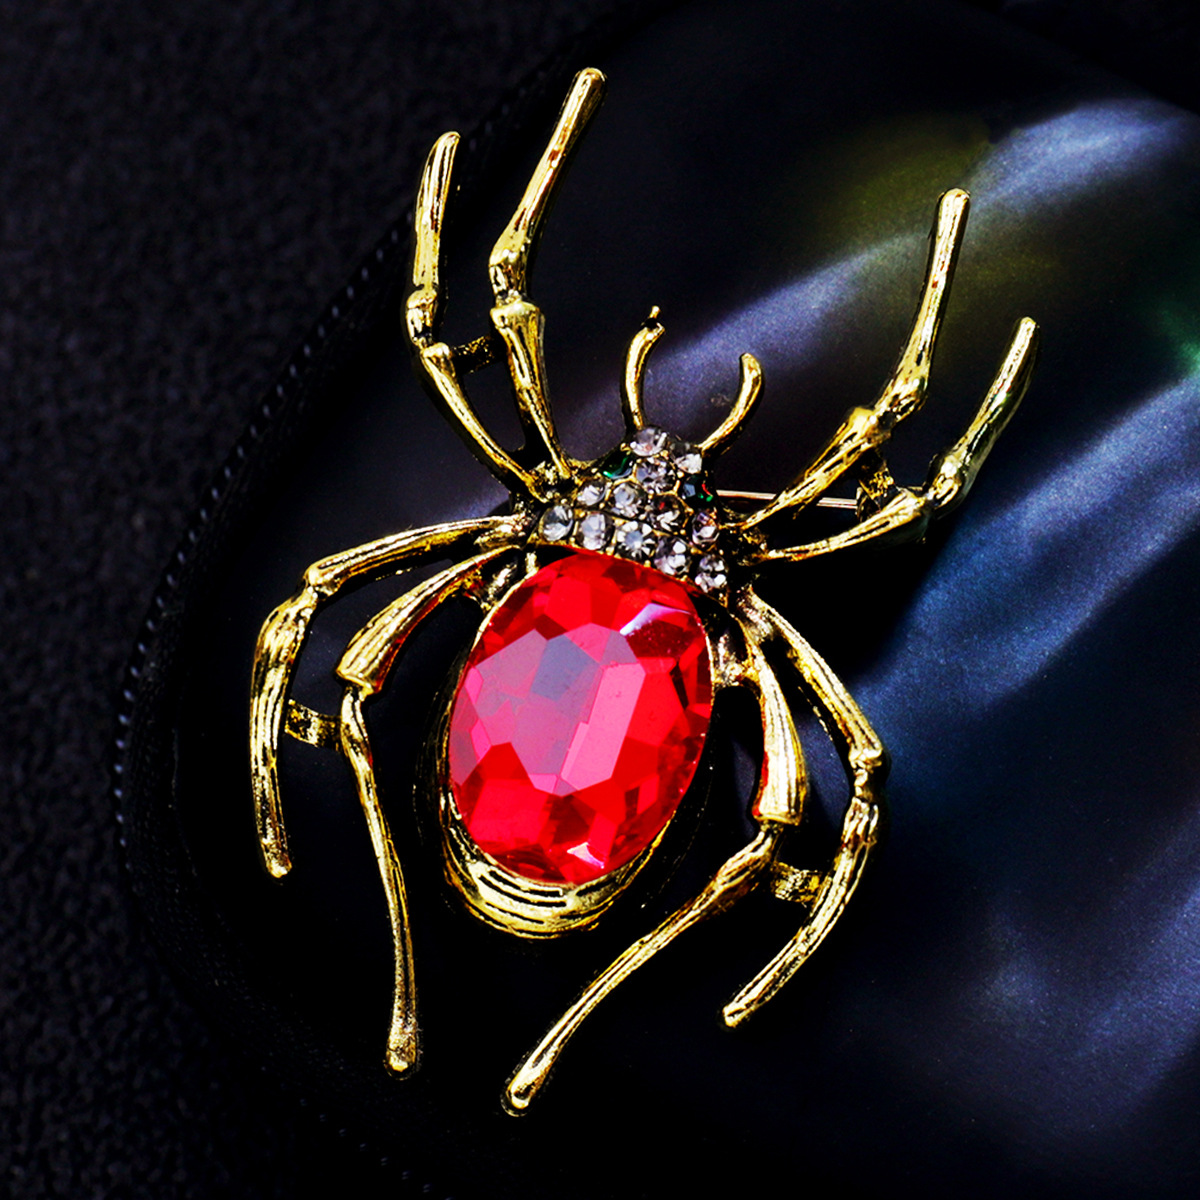 nihaojewelry Unisex Simple Style Spider Brooches